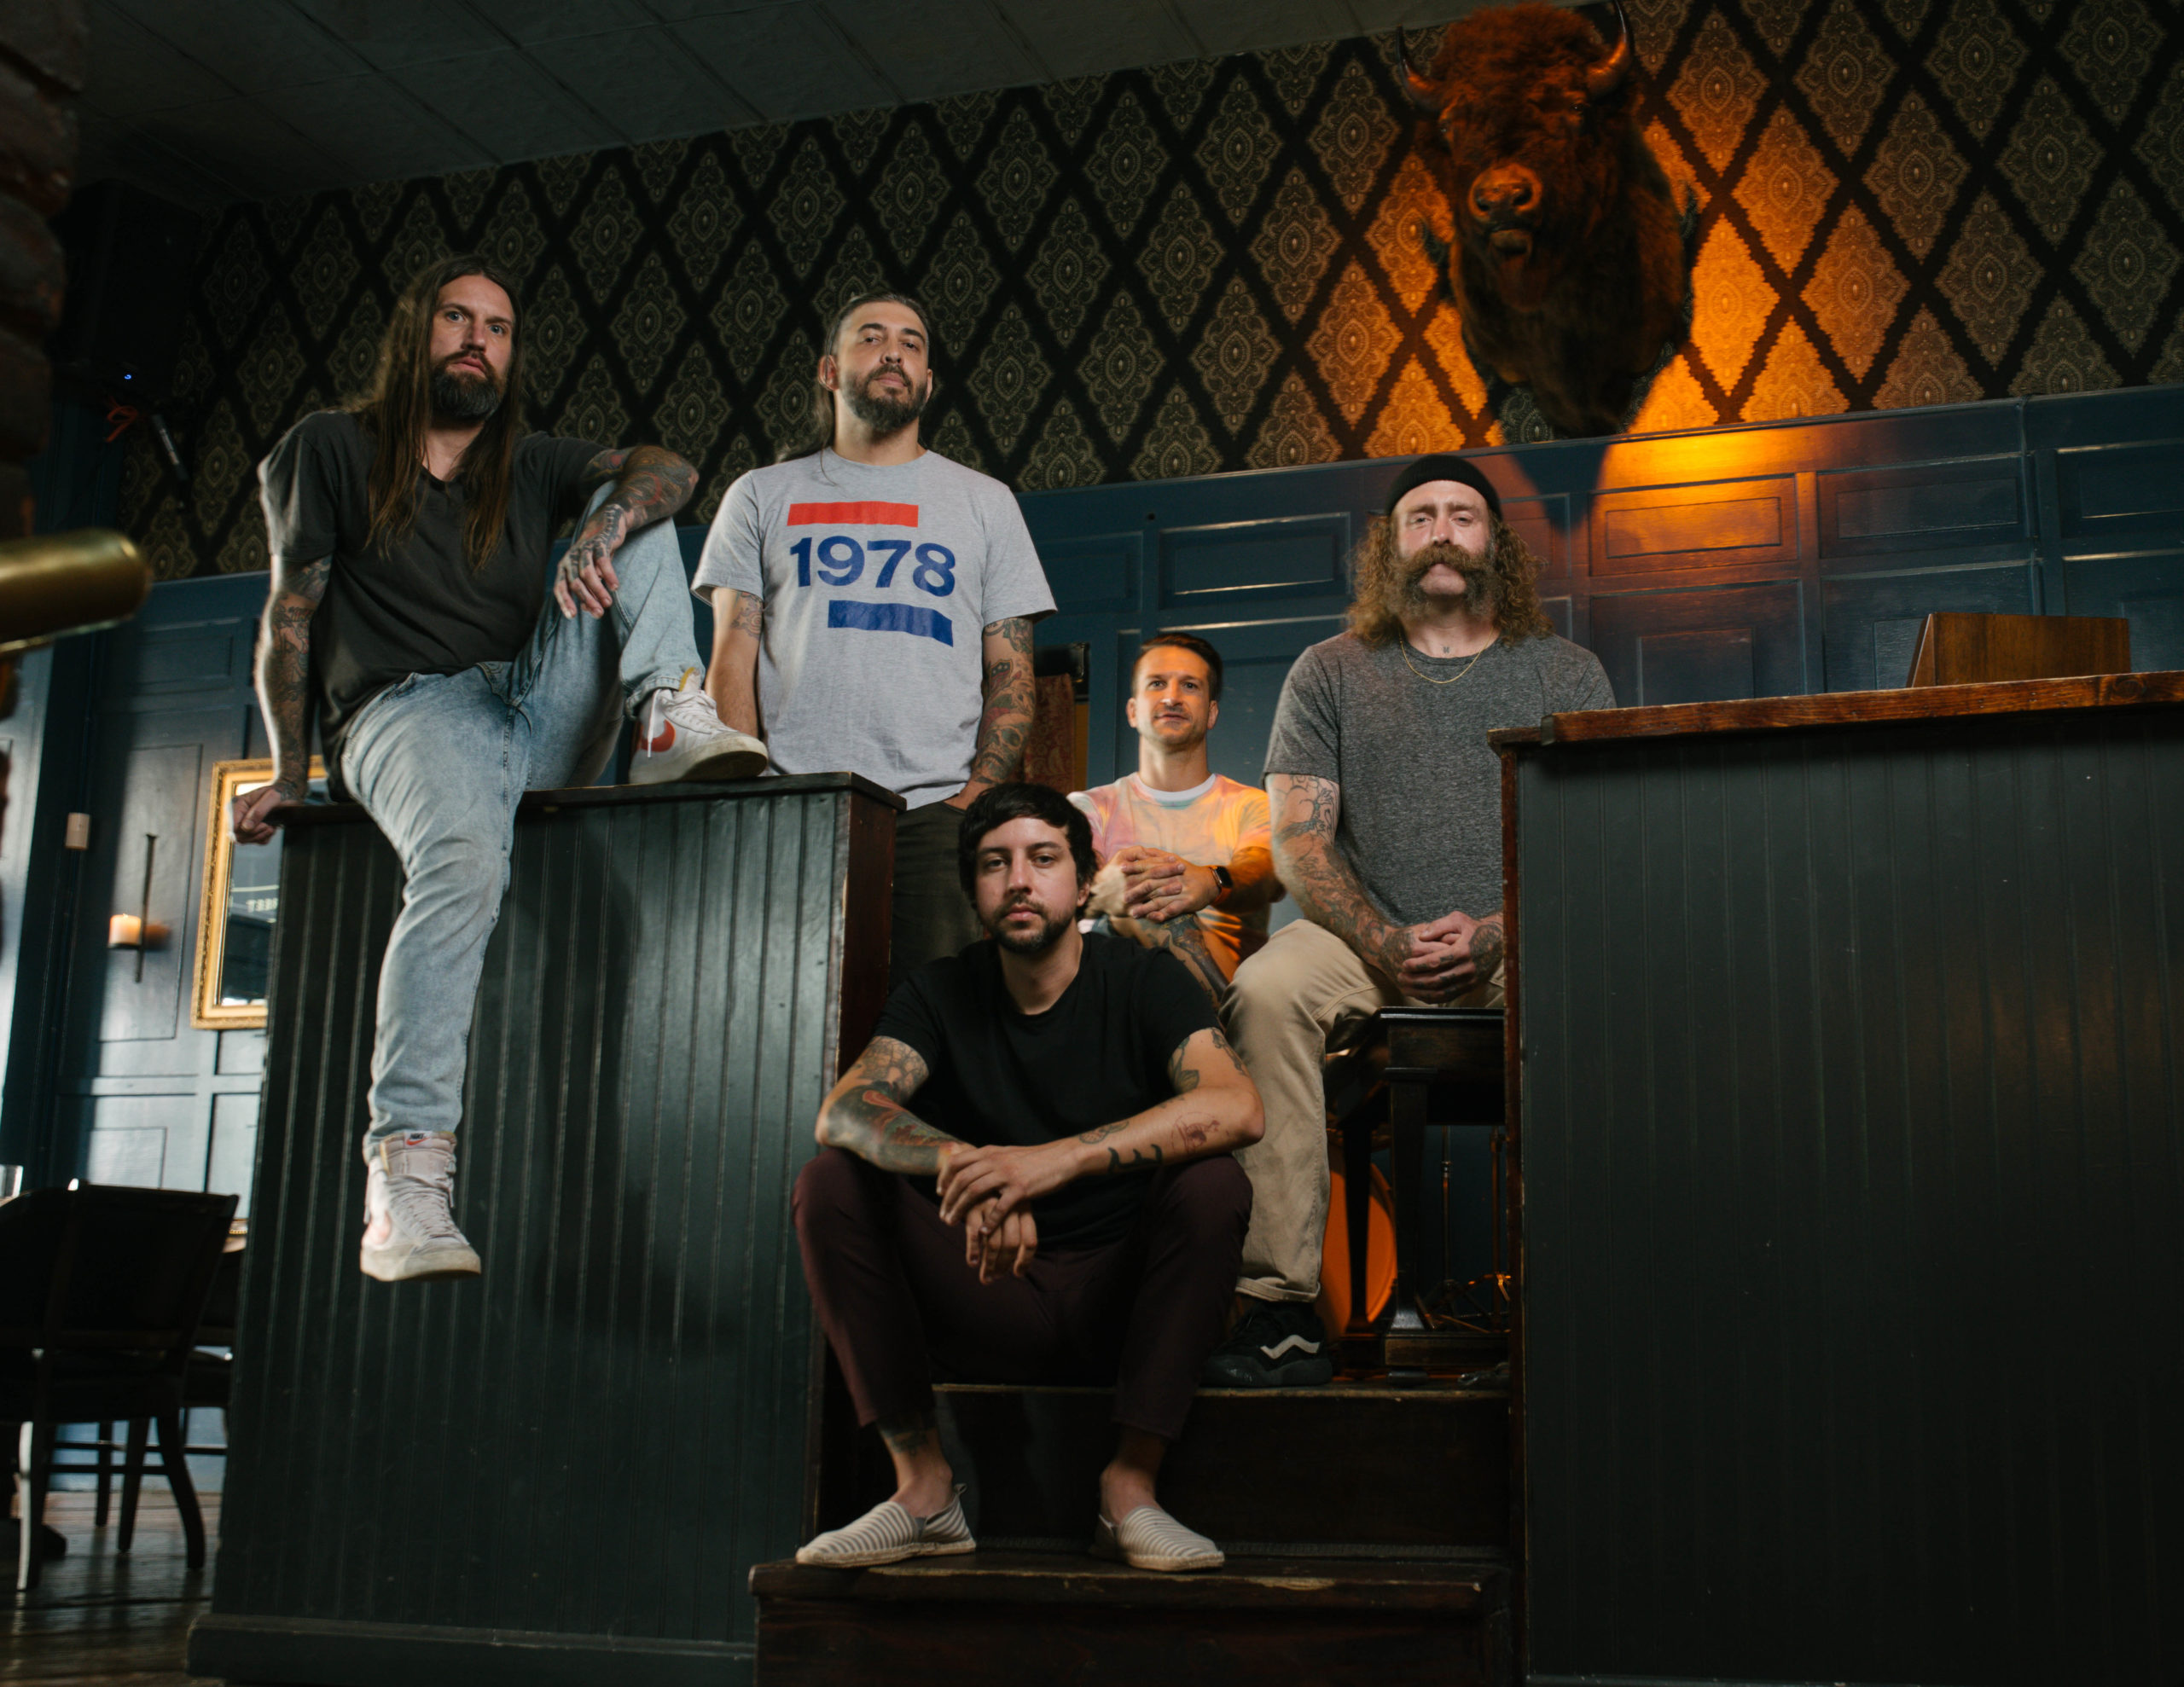 Every Time I Die, American Authors, and Baker Grace Lead This Week's Schedule for SPIN's Untitled Twitch Stream